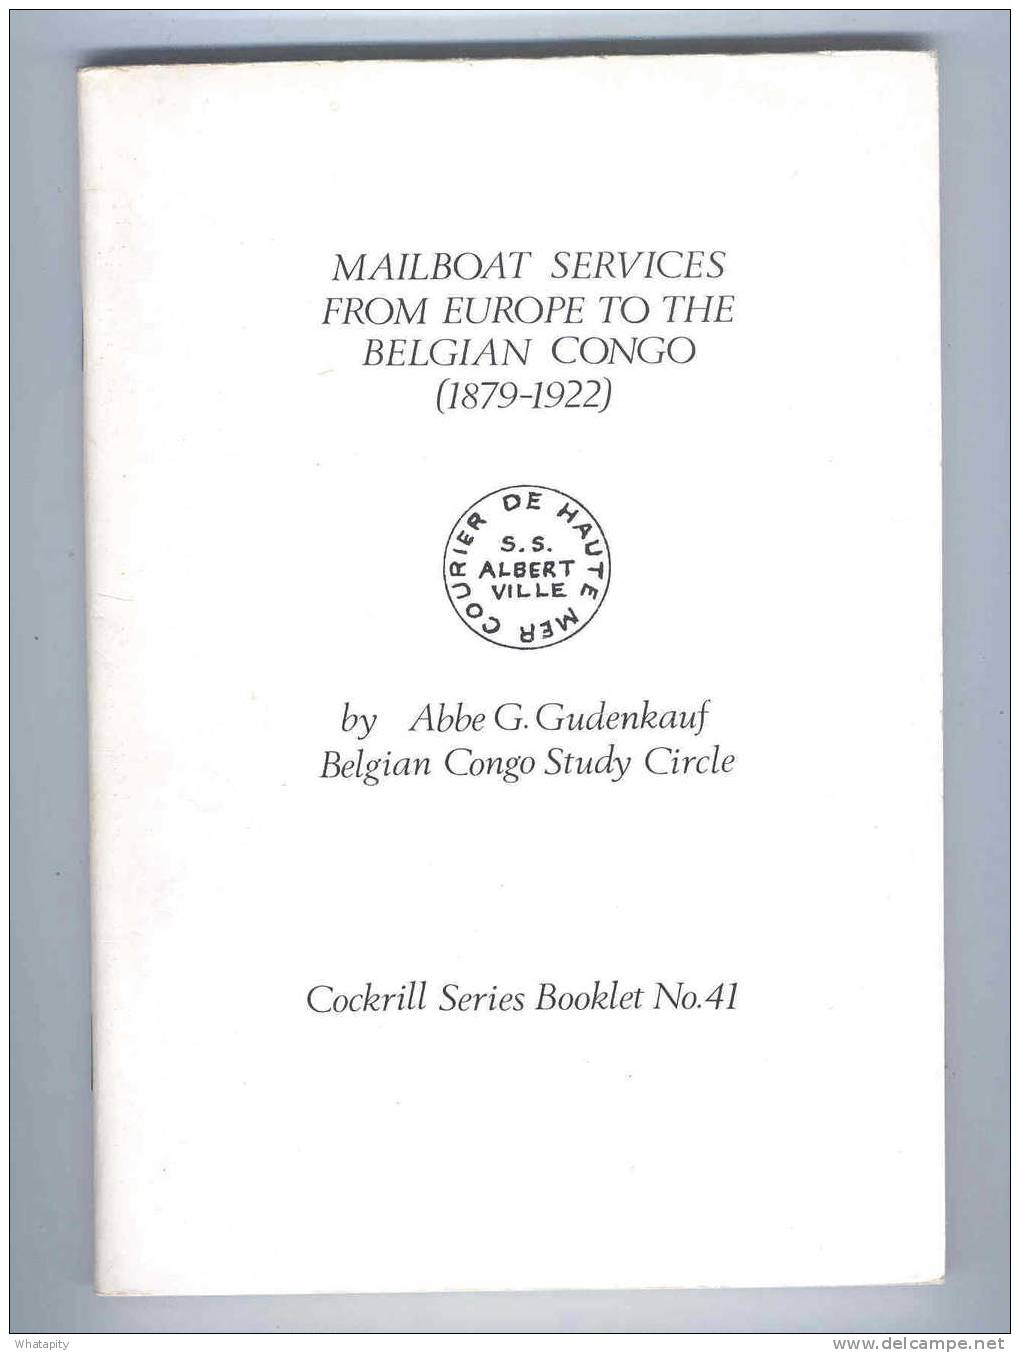 Mailboat Services From Europe To Belgian Congo By Abbé Gudenkauf , 1982 , Cockrill Series , 84 Pages  --  B0/181 - Poste Maritime & Histoire Postale